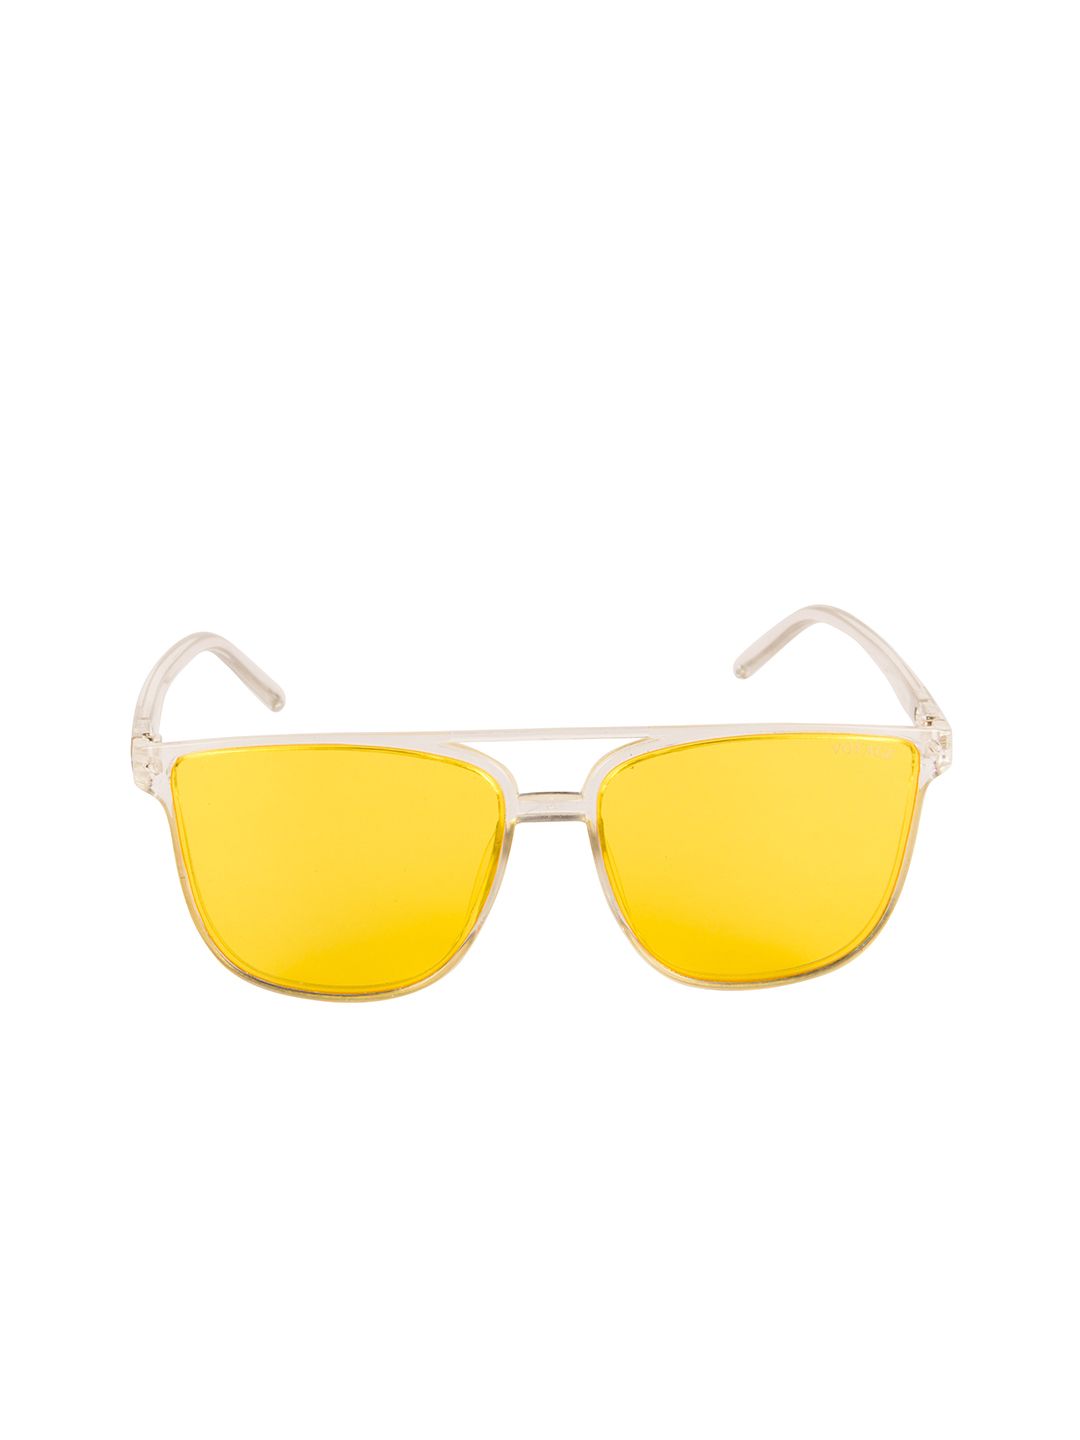 Voyage Unisex Yellow UV Protected Wayfarer Sunglasses BF82008MG3341Z Price in India